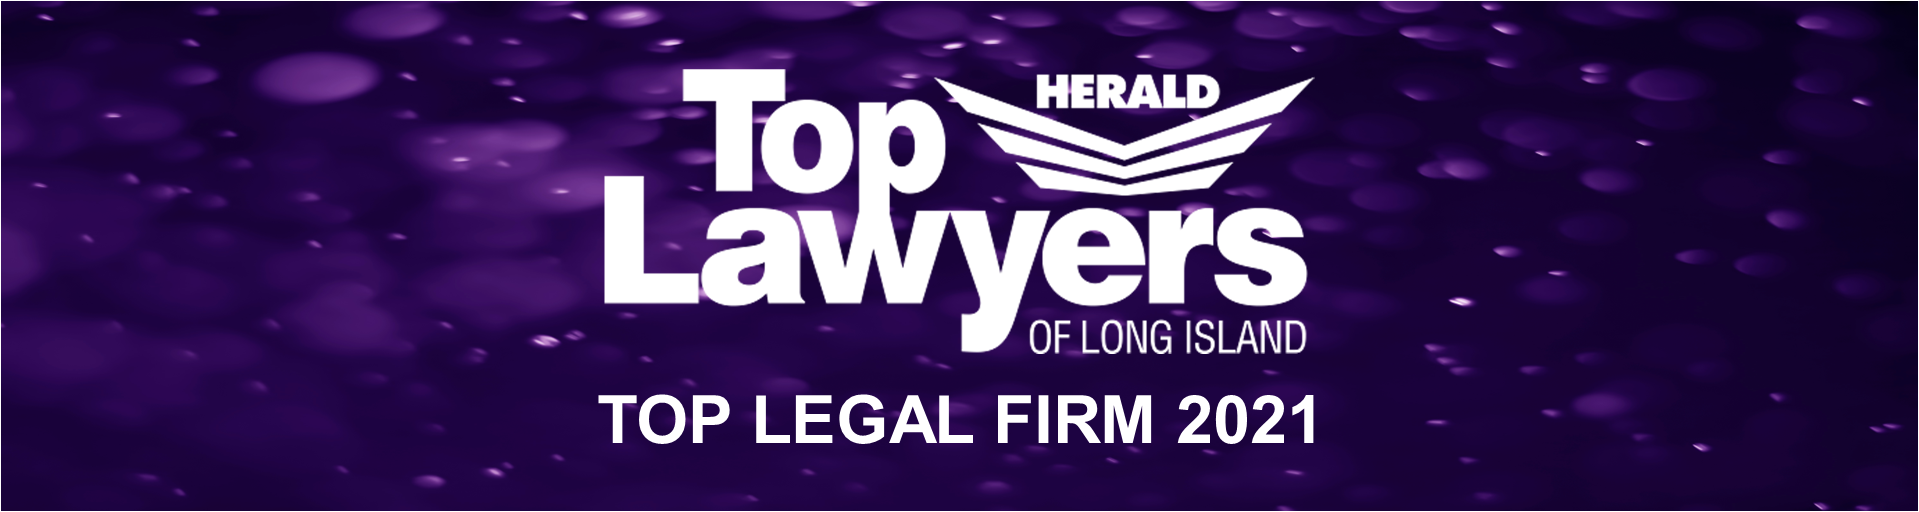 Top Lawyers of Long Island 2021 Top Legal Firm